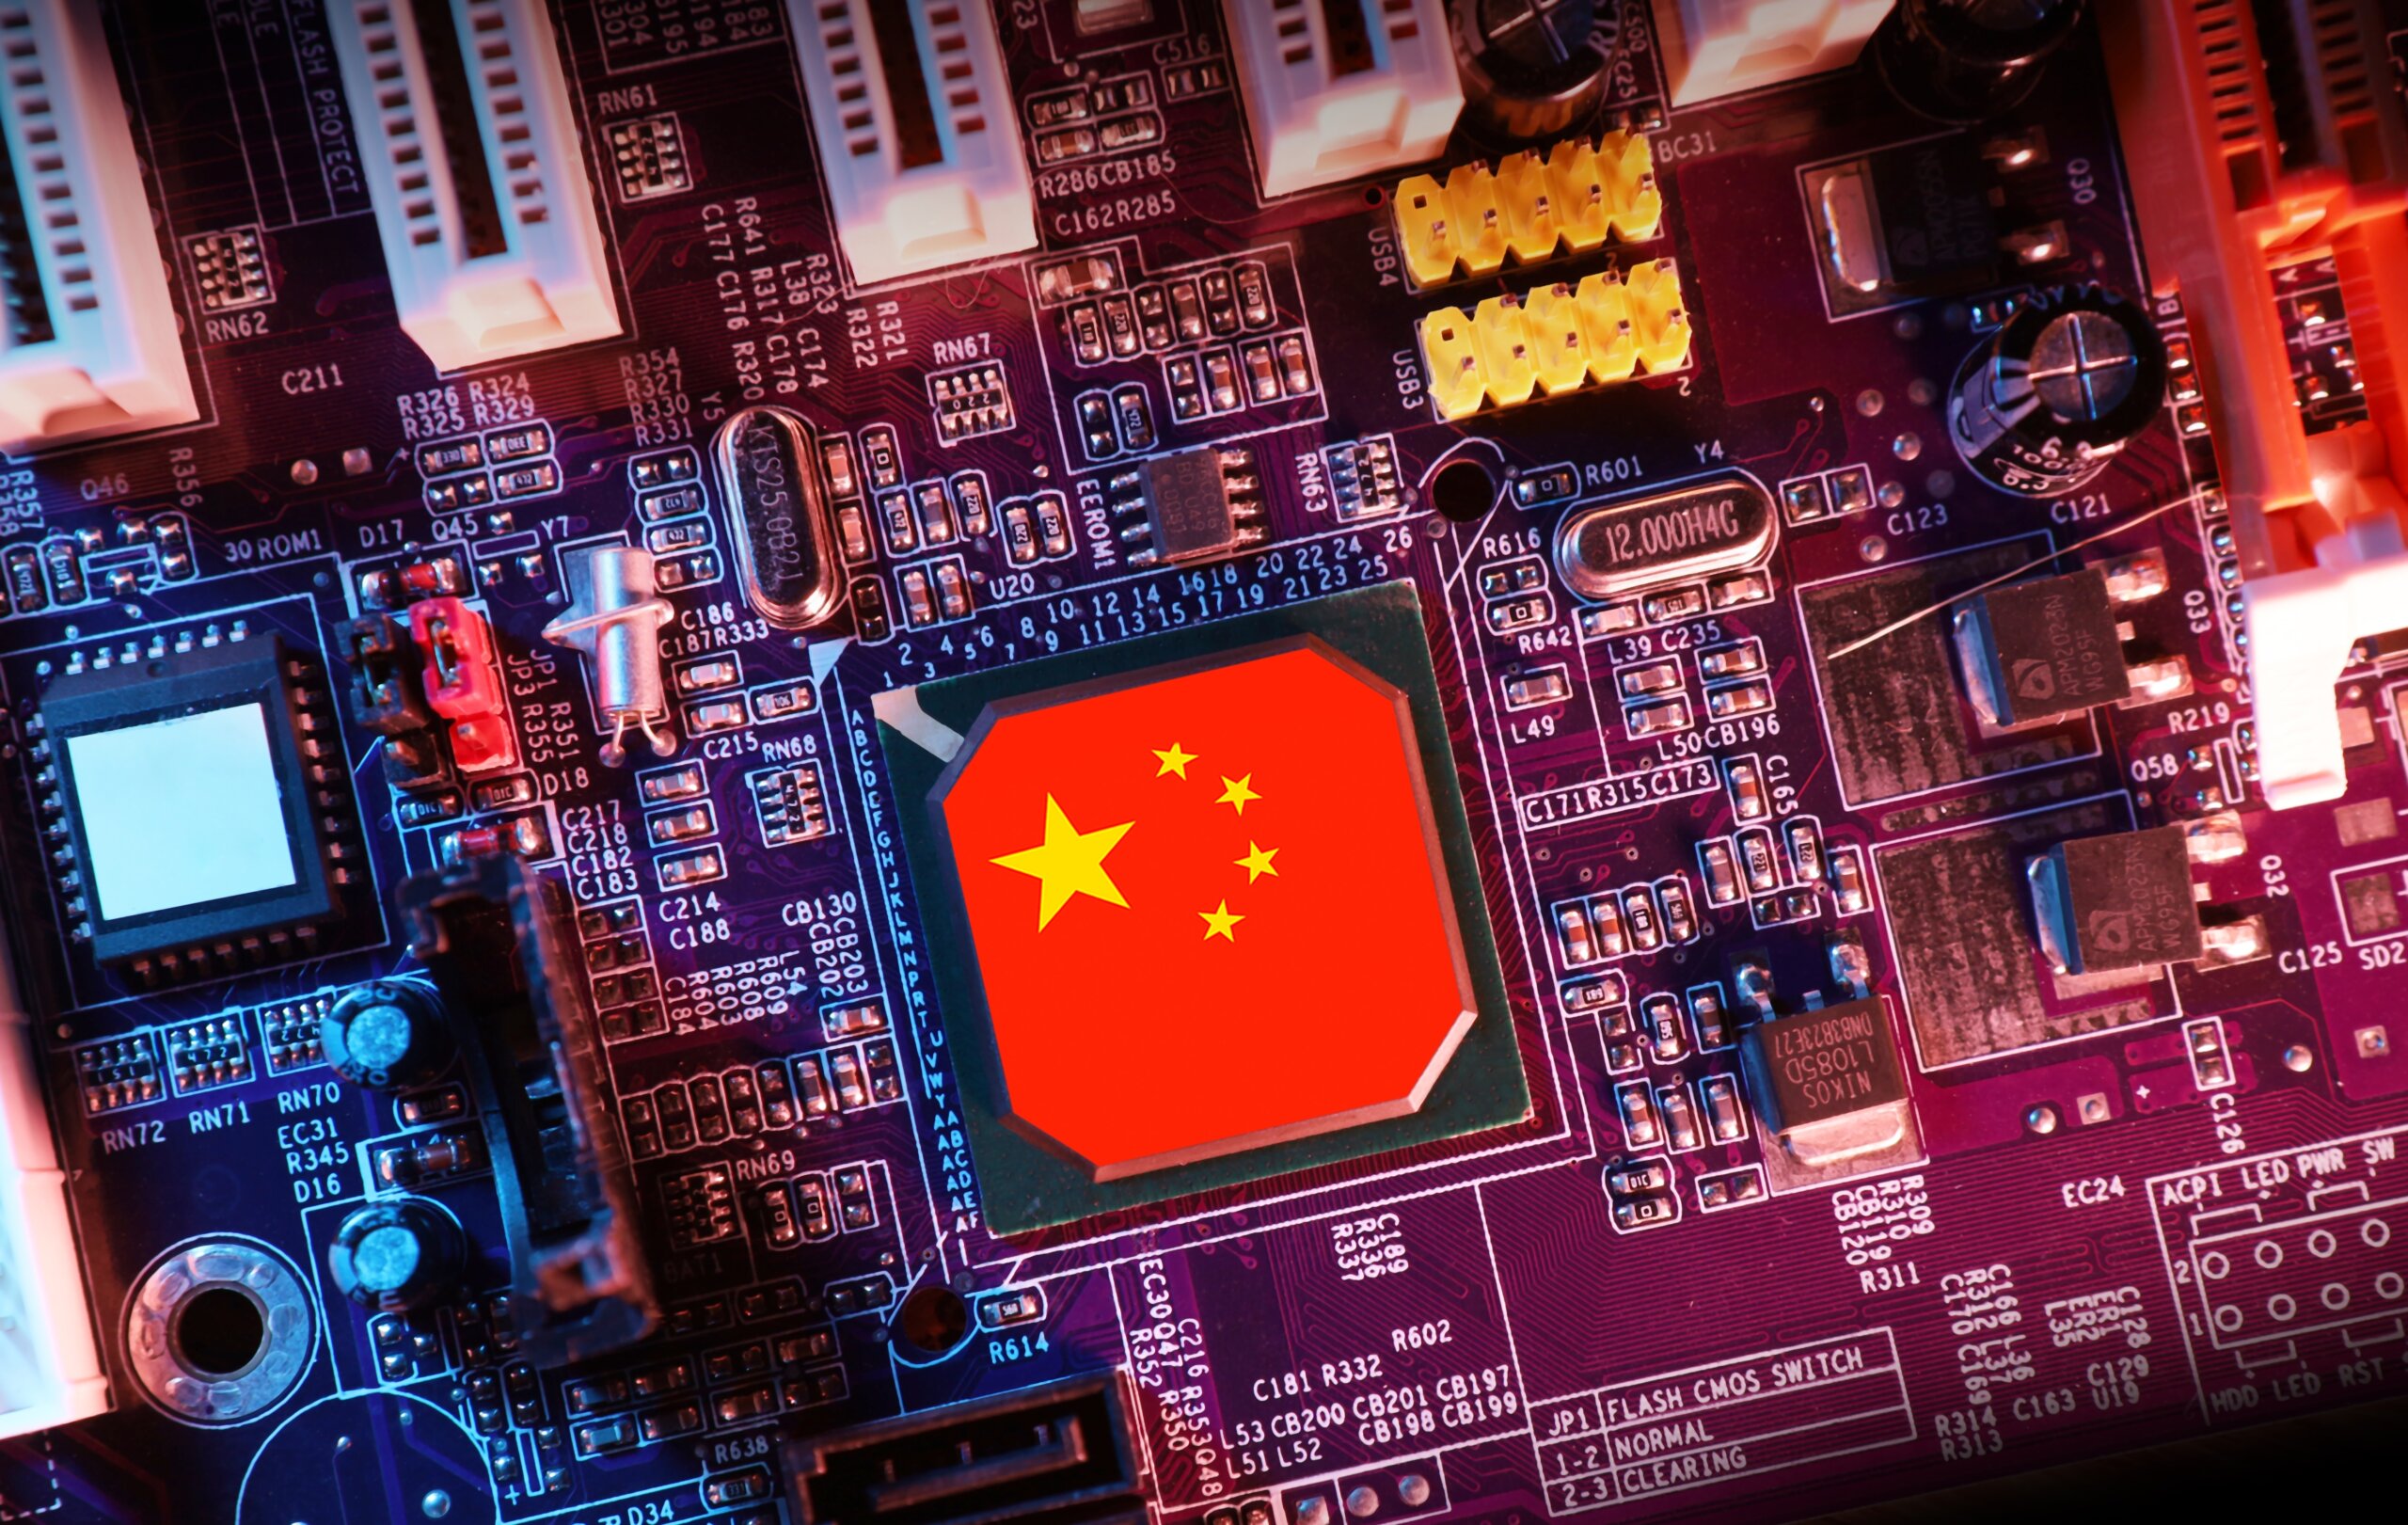 The Chinese government has determined that the country must become self-sufficient in AI memory chips, even though it may take years. Source: Shutterstock